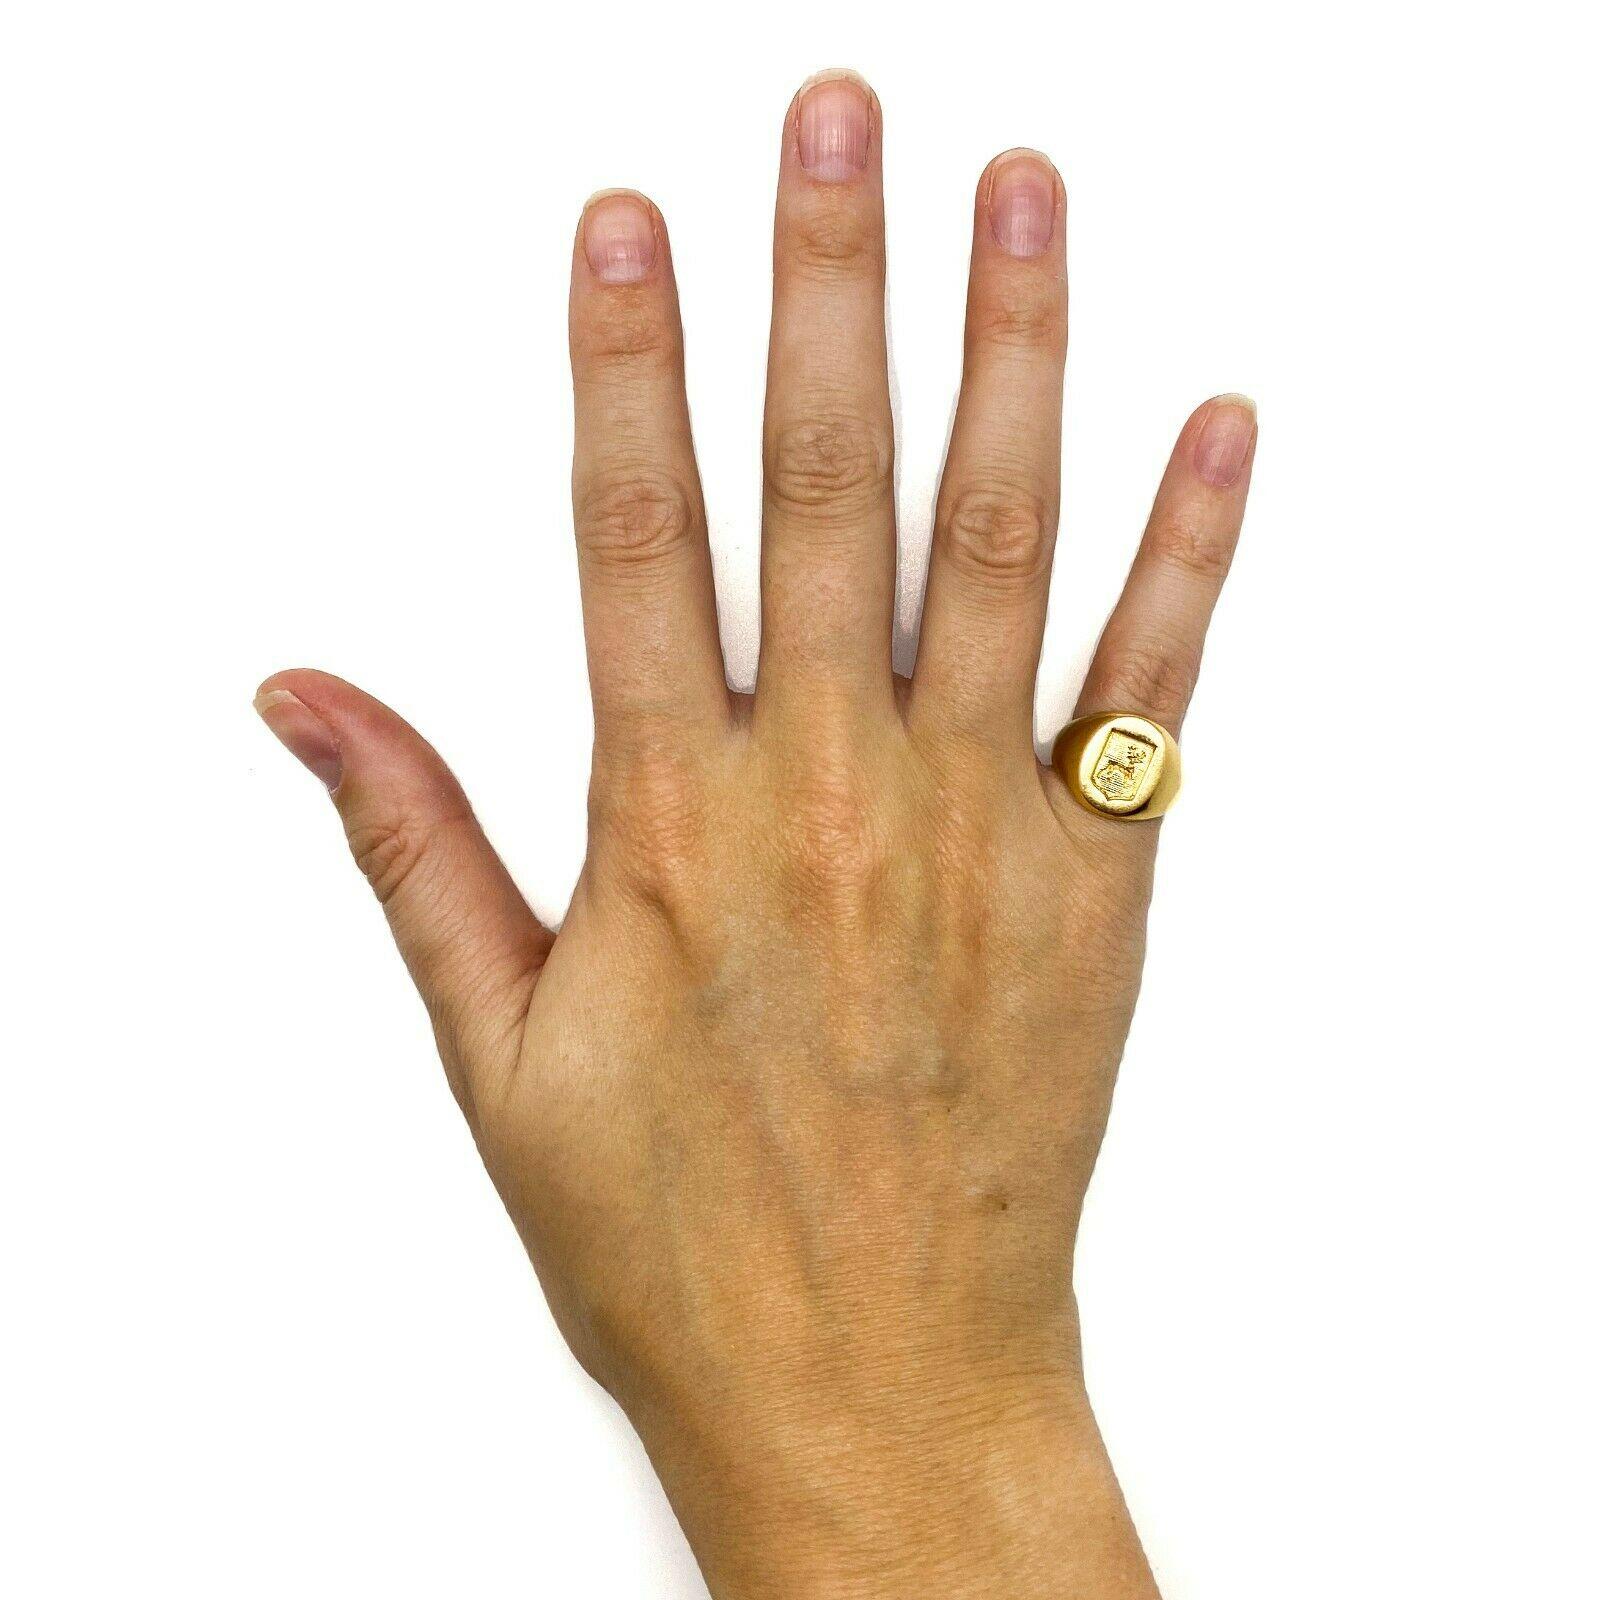 Tiffany & Co. Antique 14k Yellow Gold Deer Motif Signet Ring Rare





Here is your chance to purchase a beautiful and highly collectible designer ring.  Truly a great piece at a great price! 



Weight: 6.56 grams



Condition: great



Dimensions: